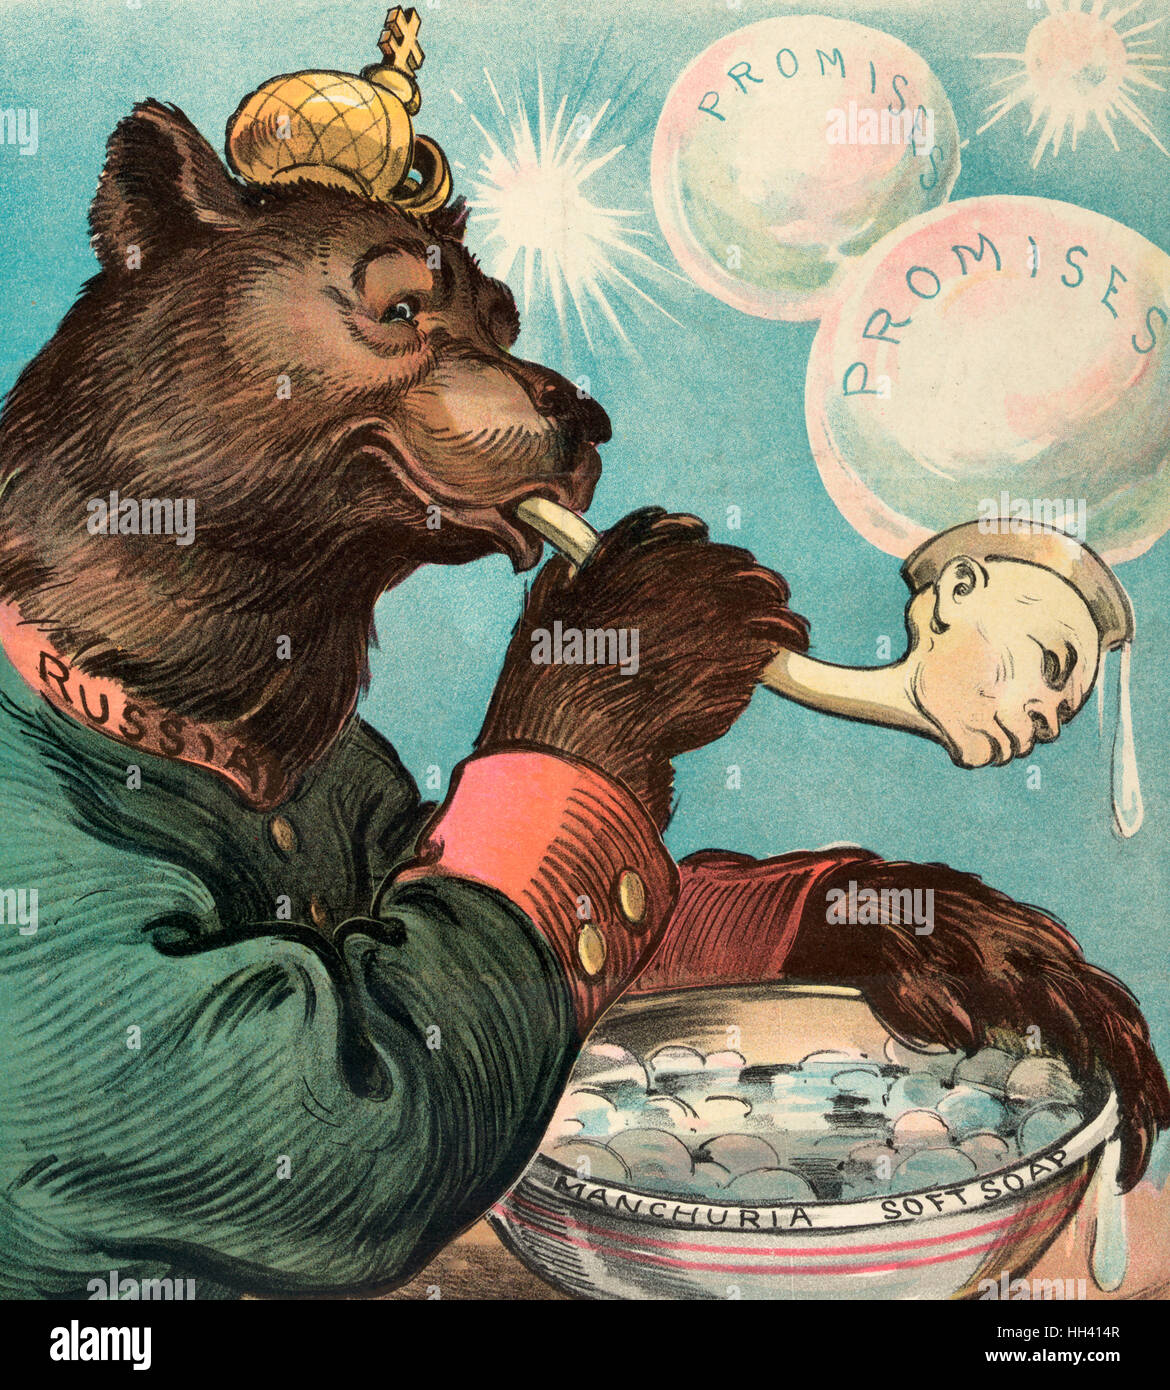 Bubbles - Political Cartoon shows the Russian bear blowing soap bubbles labeled 'Promises' through a meerschaum pipe with a Chinese face, using liquid from a bowl labeled 'Manchurian soft soap'. 1903 Stock Photo